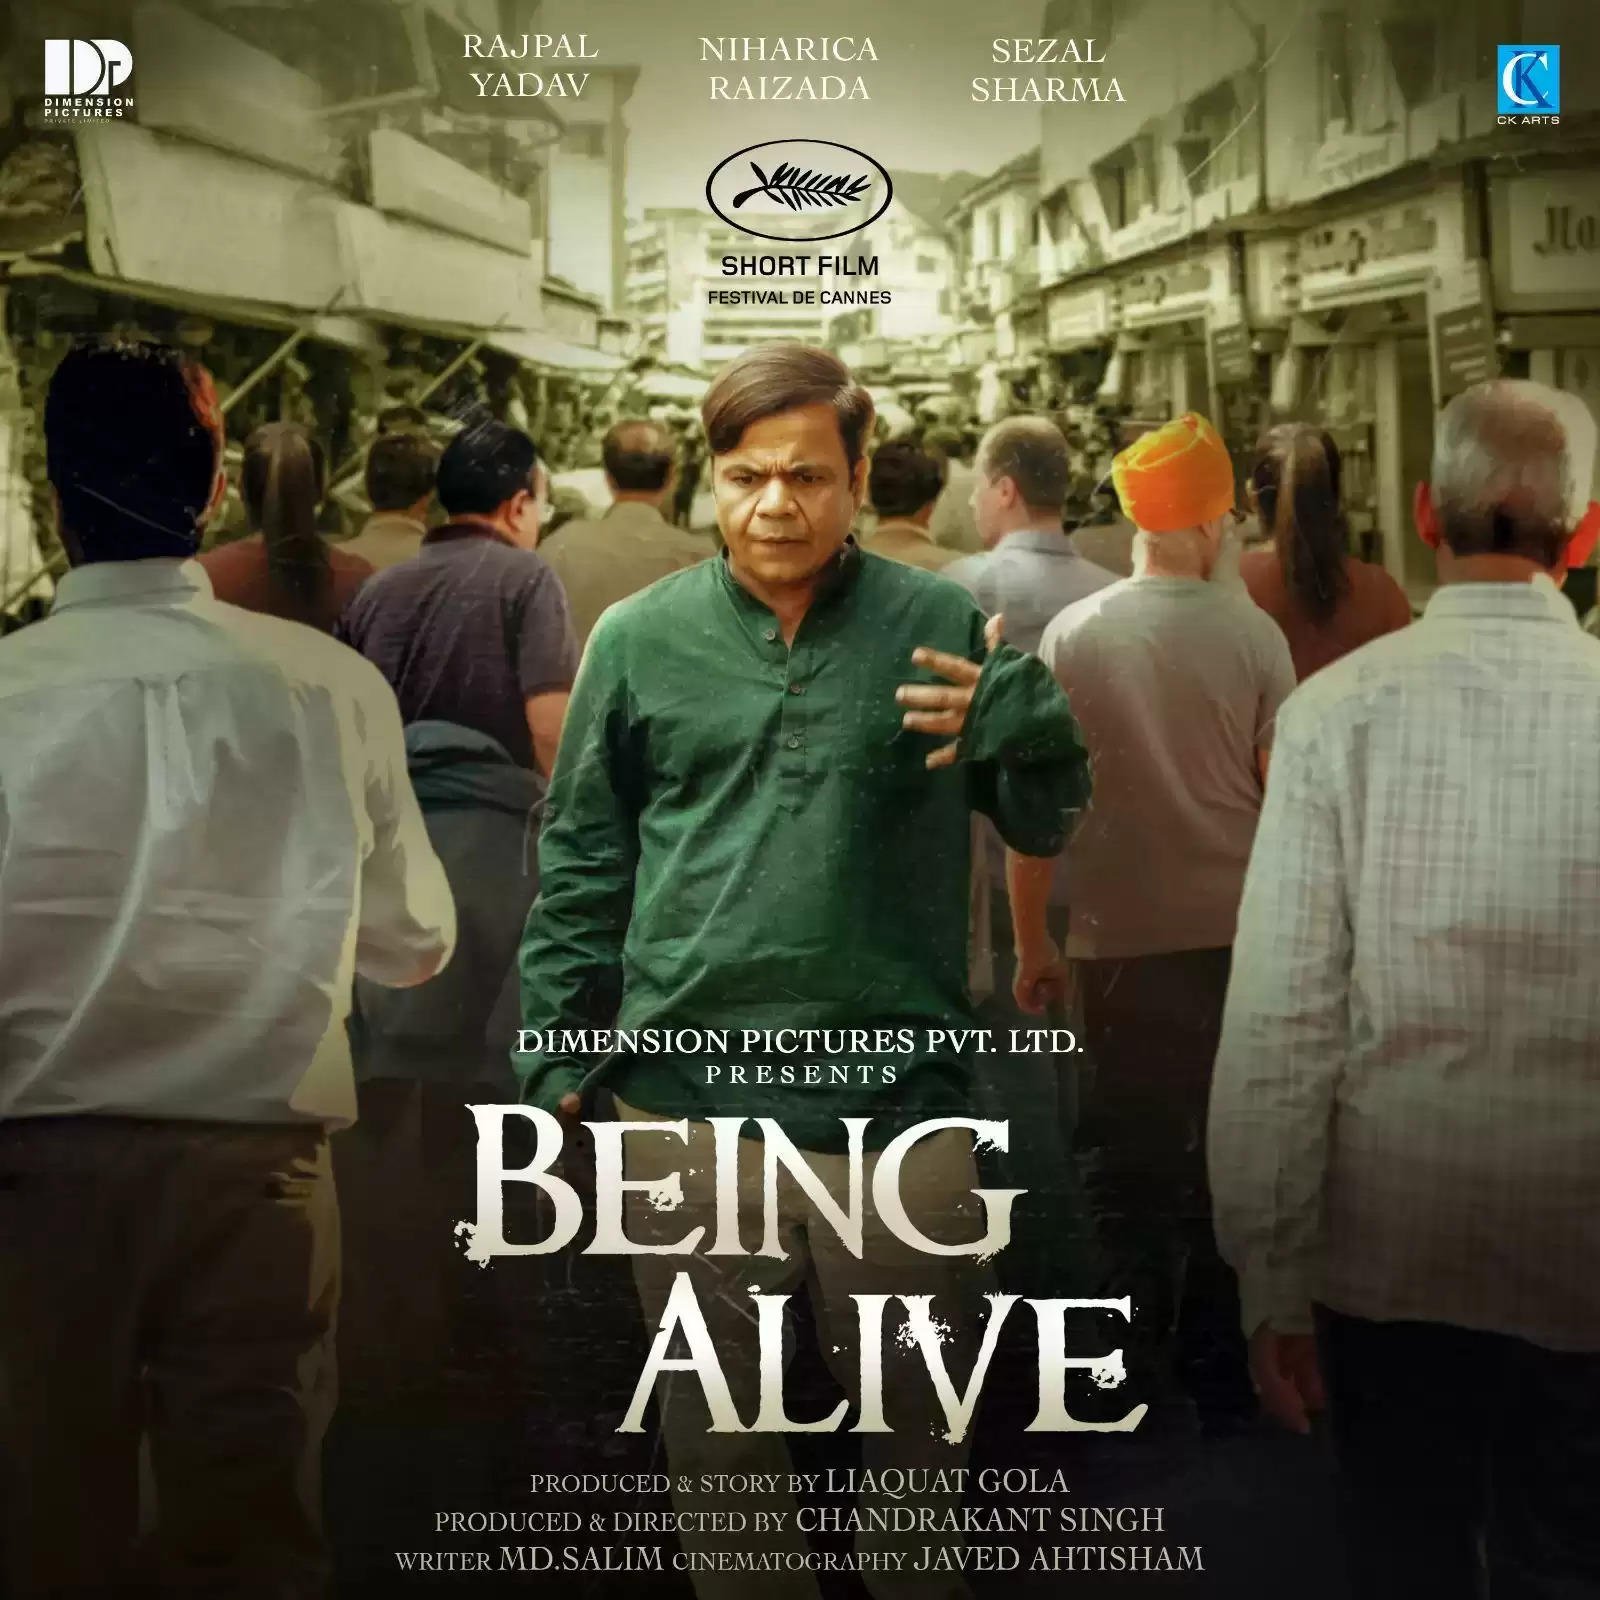 "BEING ALIVE" SOARS TO NEW HEIGHTS AS IT PREMIERES AT THE PRESTIGIOUS CANNES FILM FESTIVAL